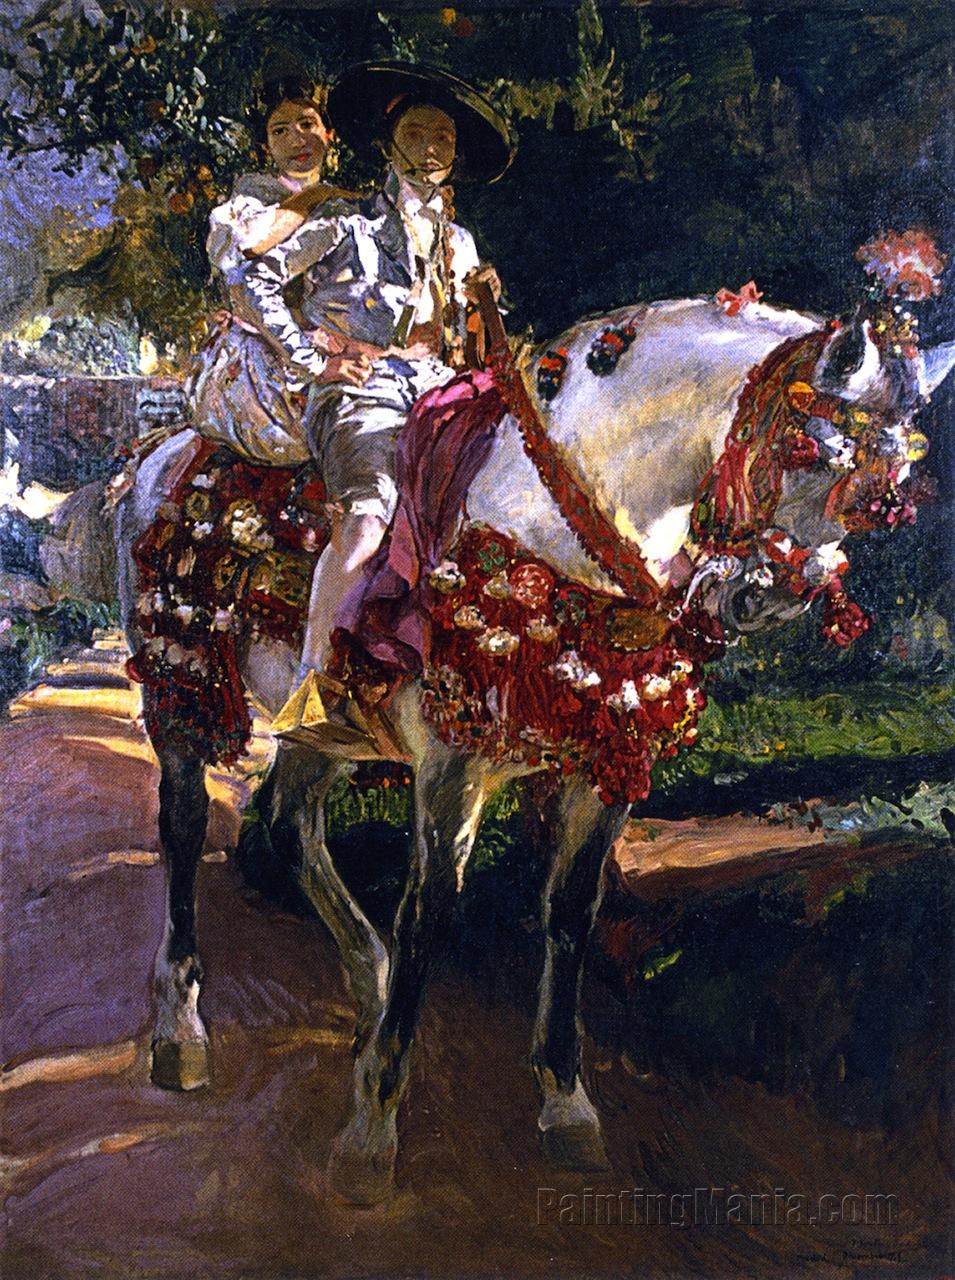 Elena and Maria, the Painter's Daughters, on Horseback in Valencian Period Costumes